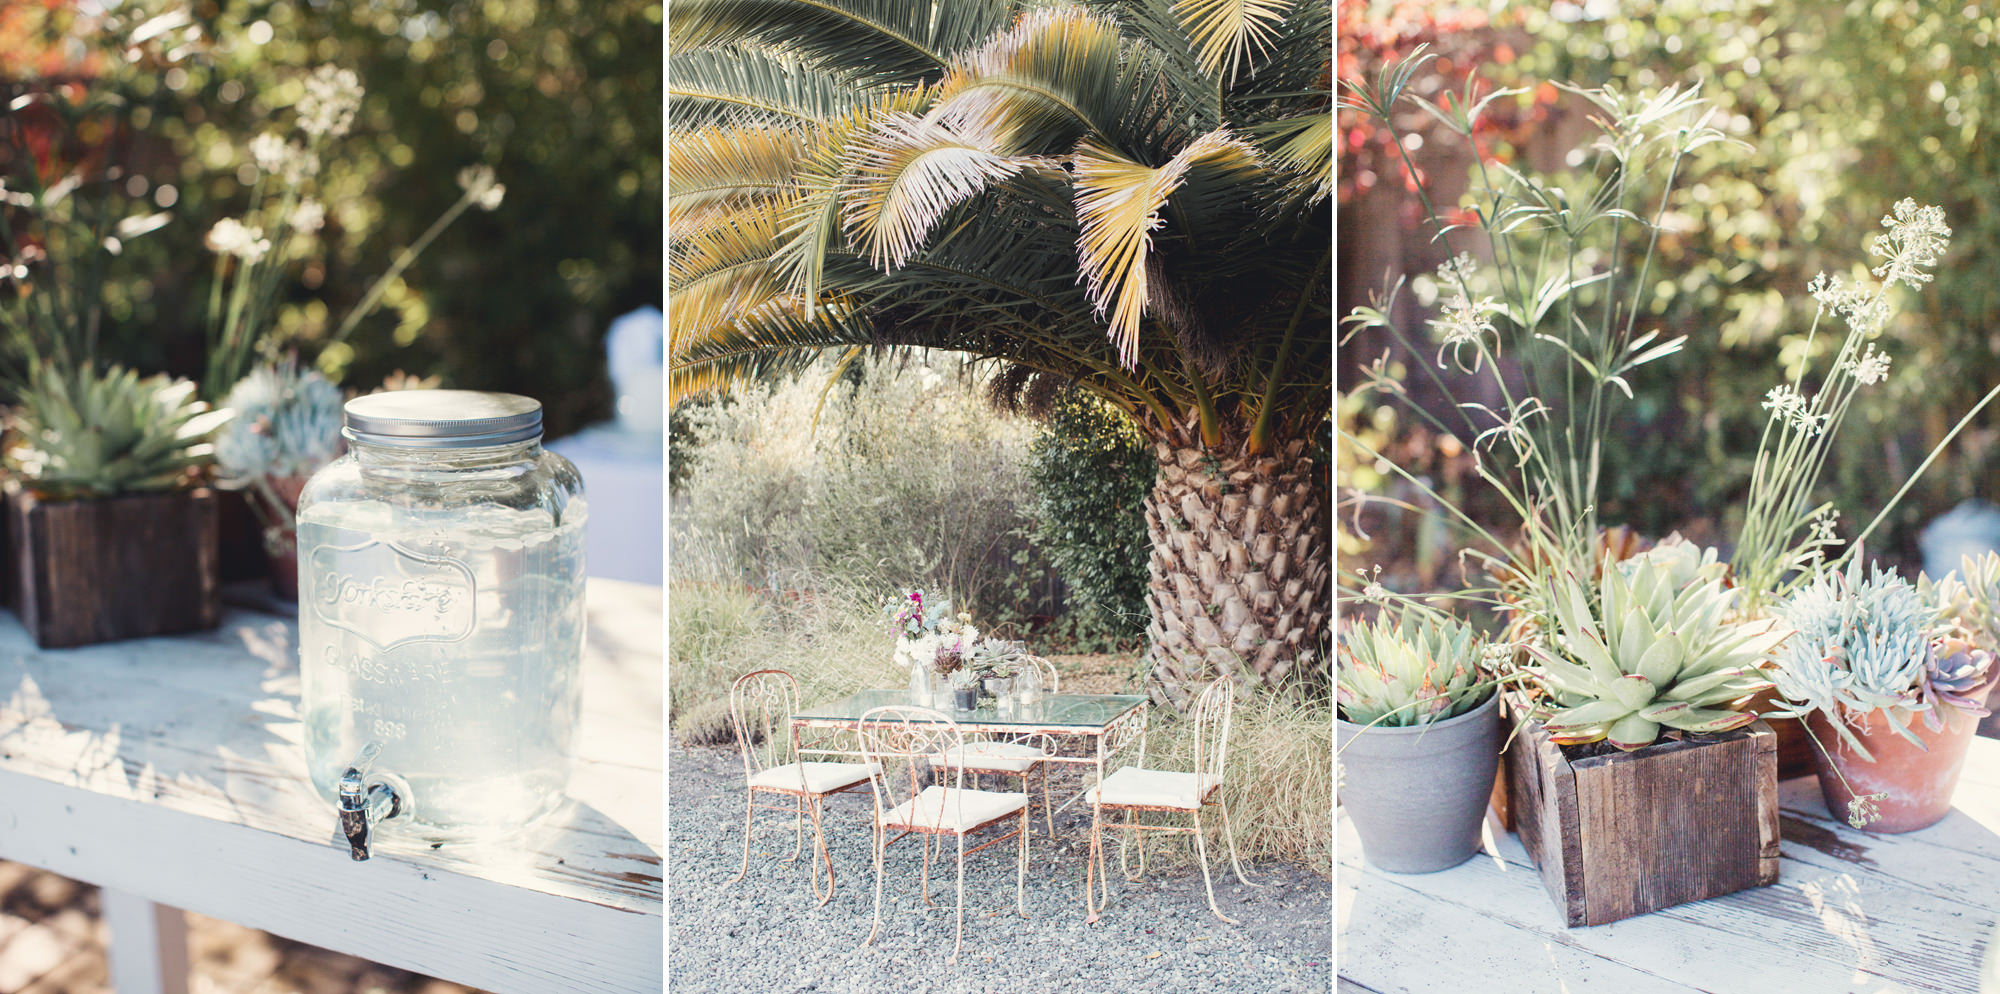 Private Residence Wedding in California ©Anne-Claire Brun 0006